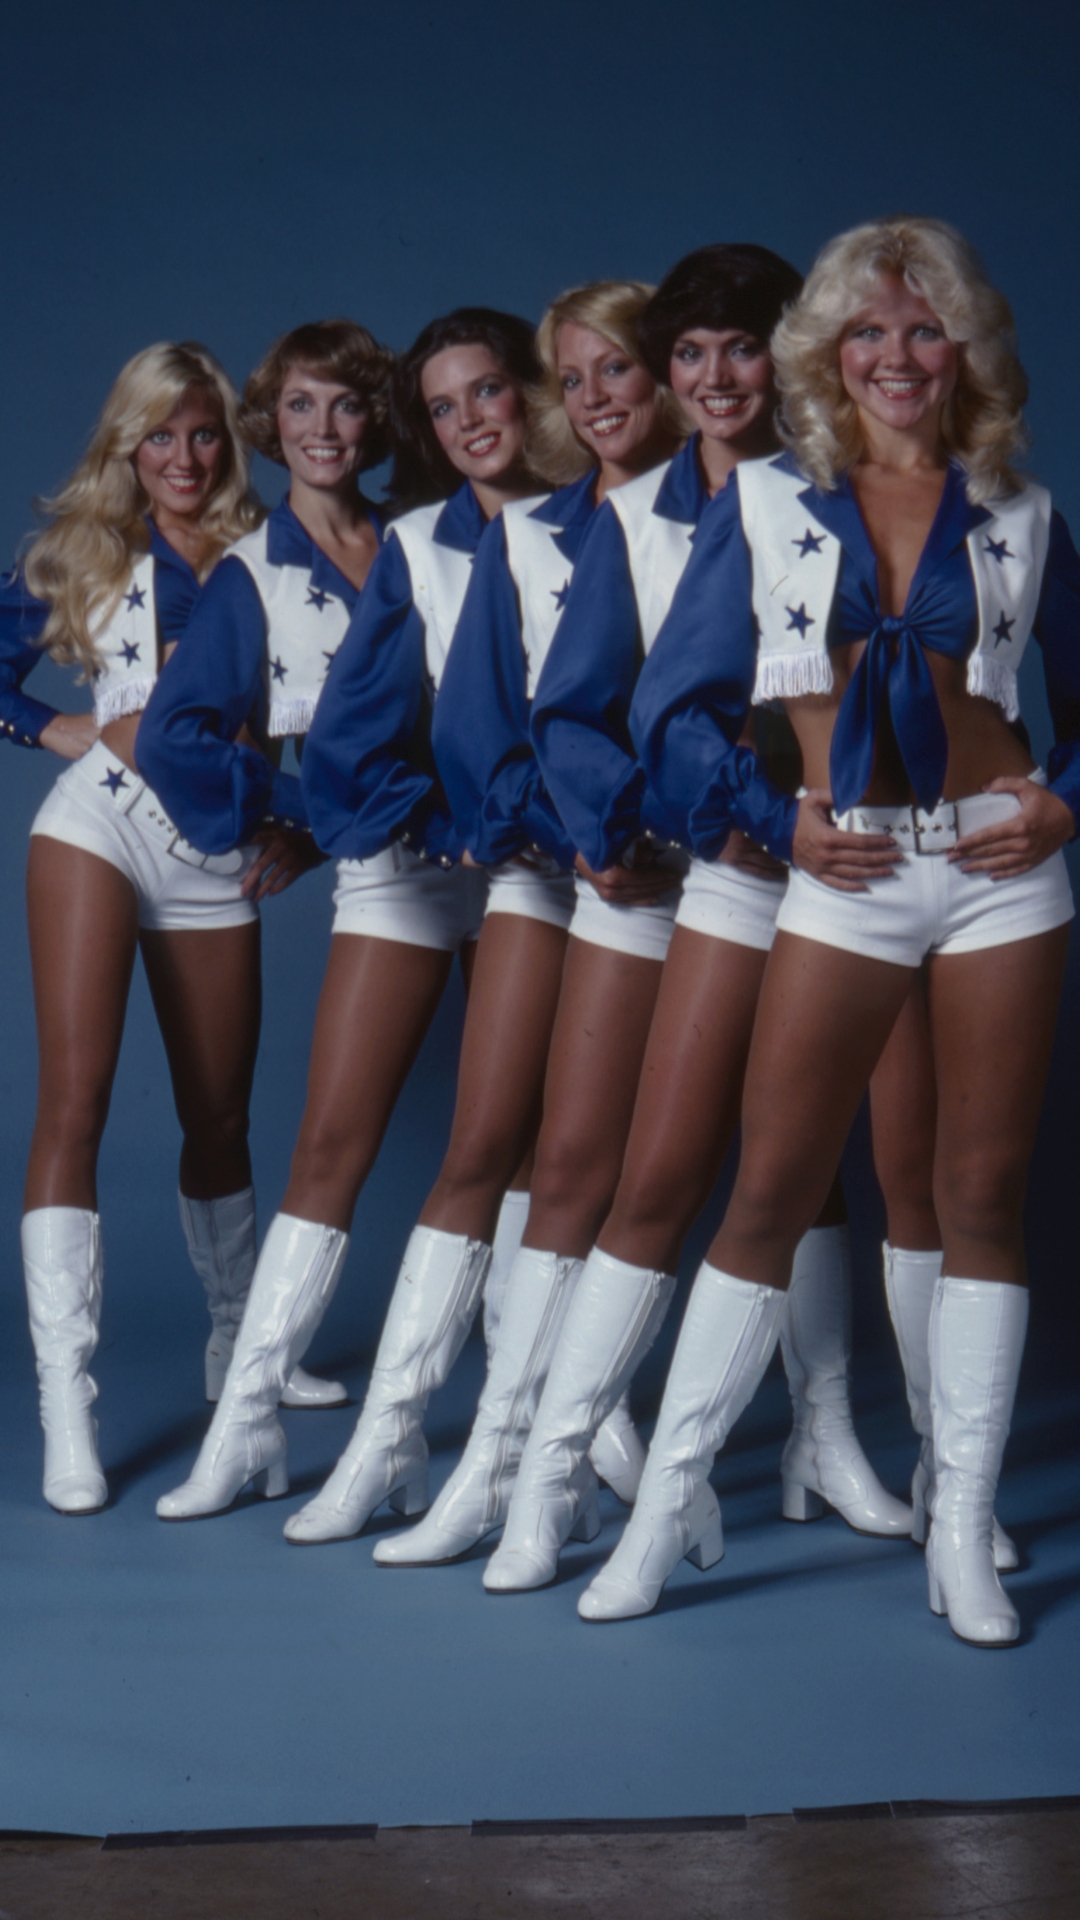 Micheling Austin, Connie Dolan, Denise Doran, Michele Vaughn, Shannon Baker promotional photo for the ABC Dallas Cowboys Cheerleaders tv series 'The 36 Most Beautiful Girls in Texas